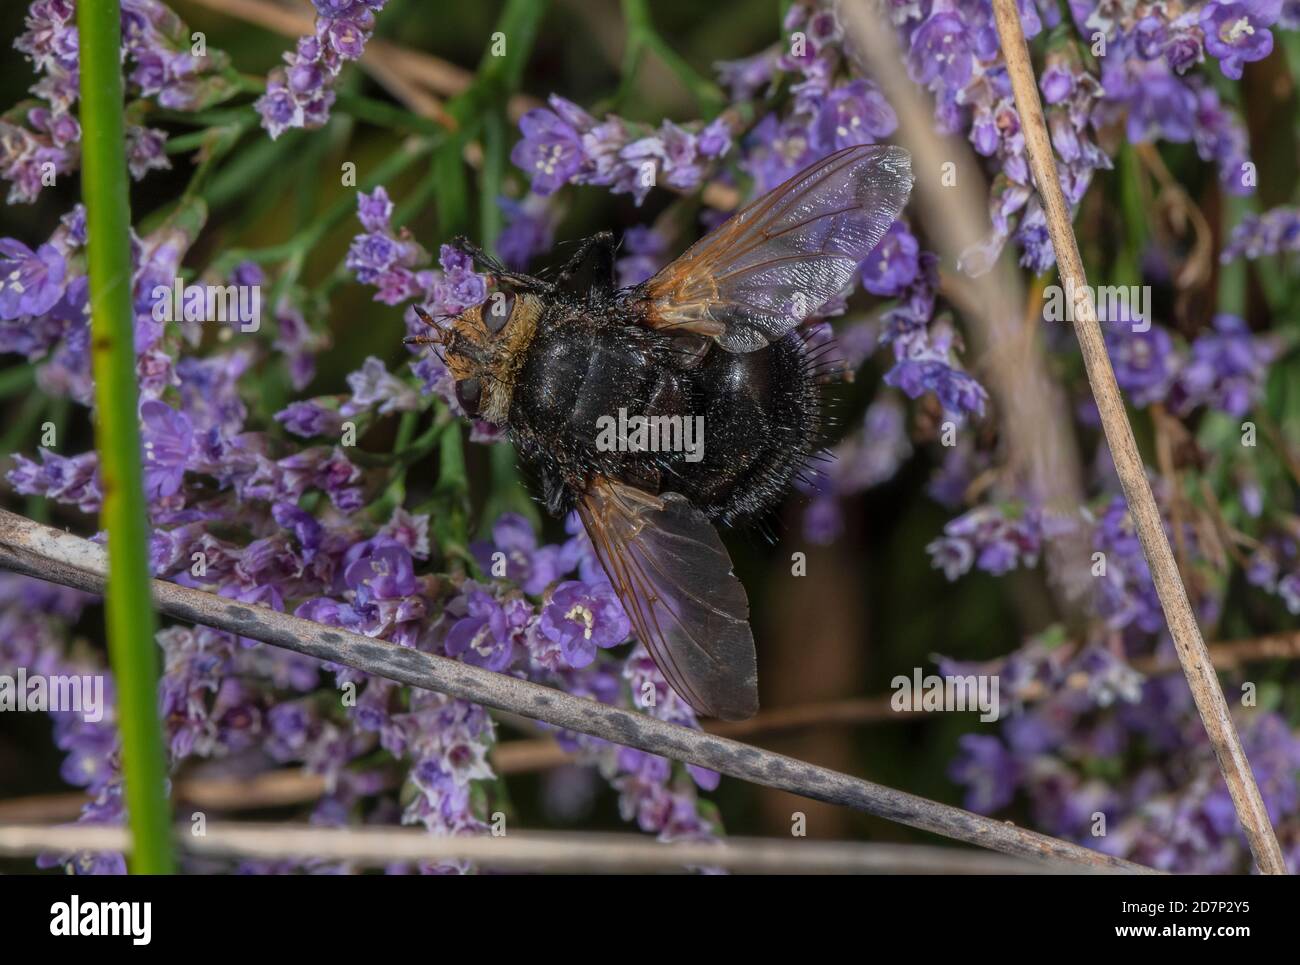 Giant tachinid fly, Tachina grossa, visiting flowers of Sea Lavender. Parasite of moth larvae. Stock Photo